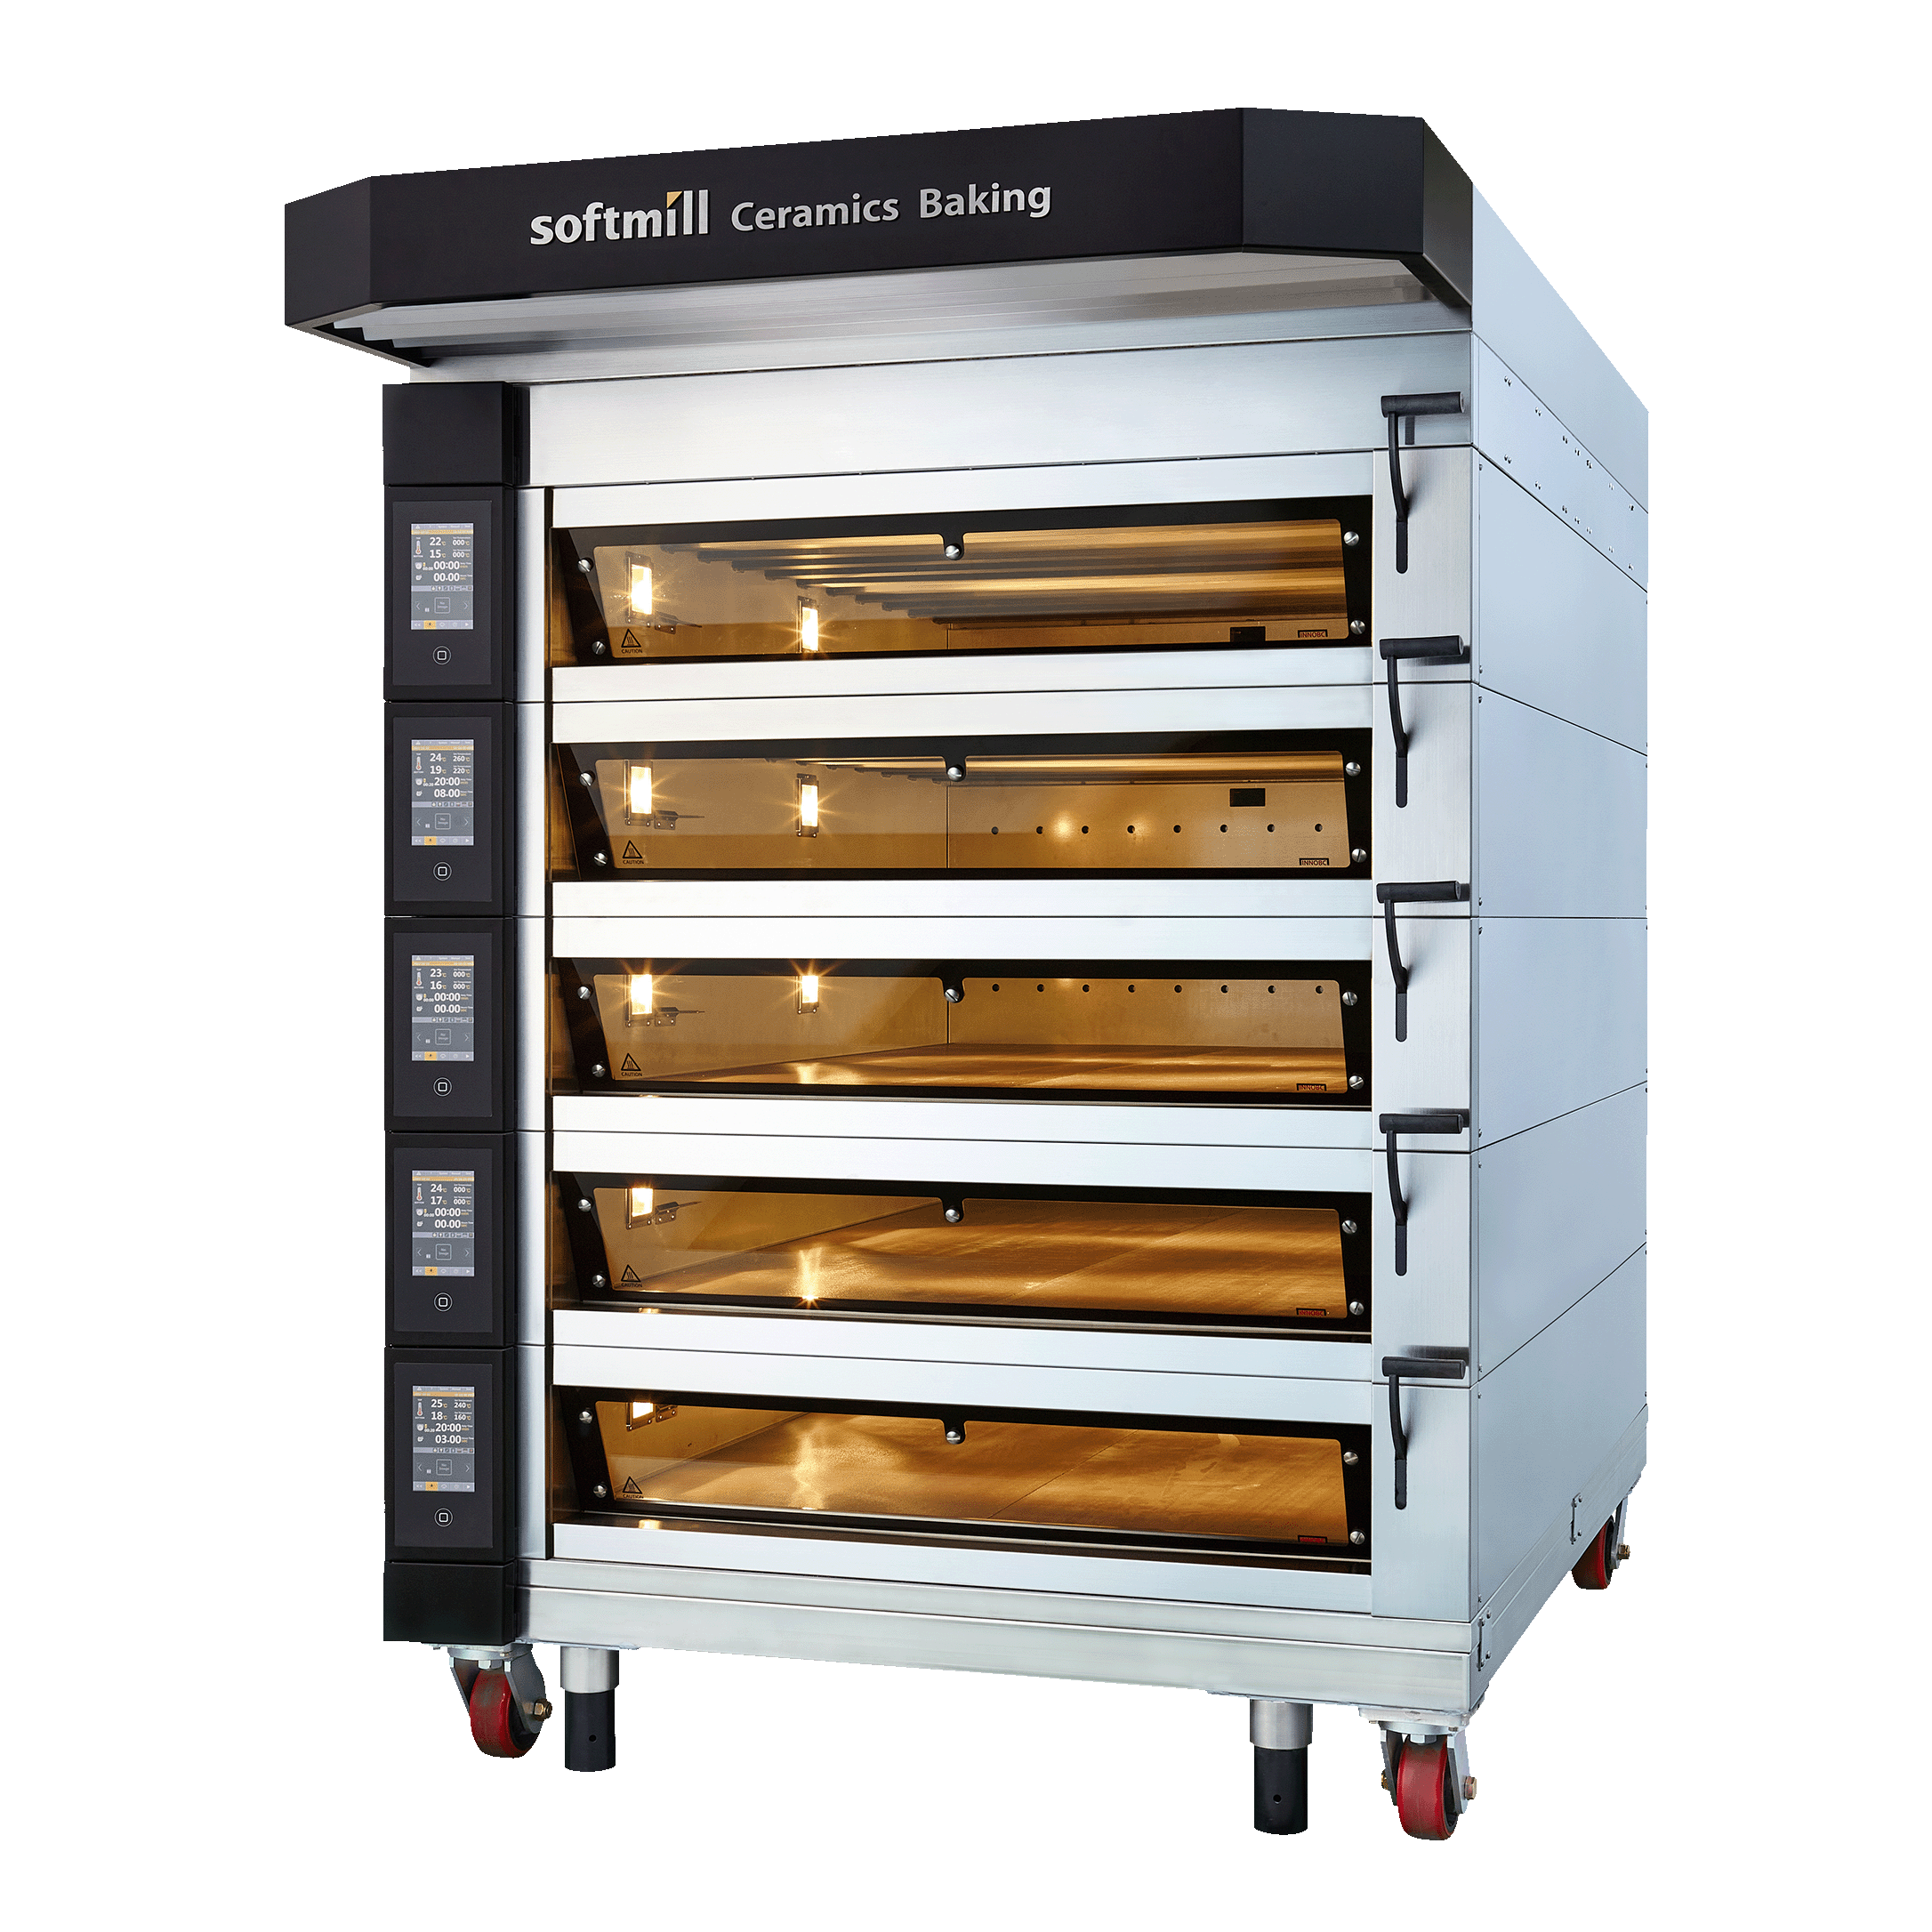 InnoBC Oven 8 trays 5 tiers detail page link